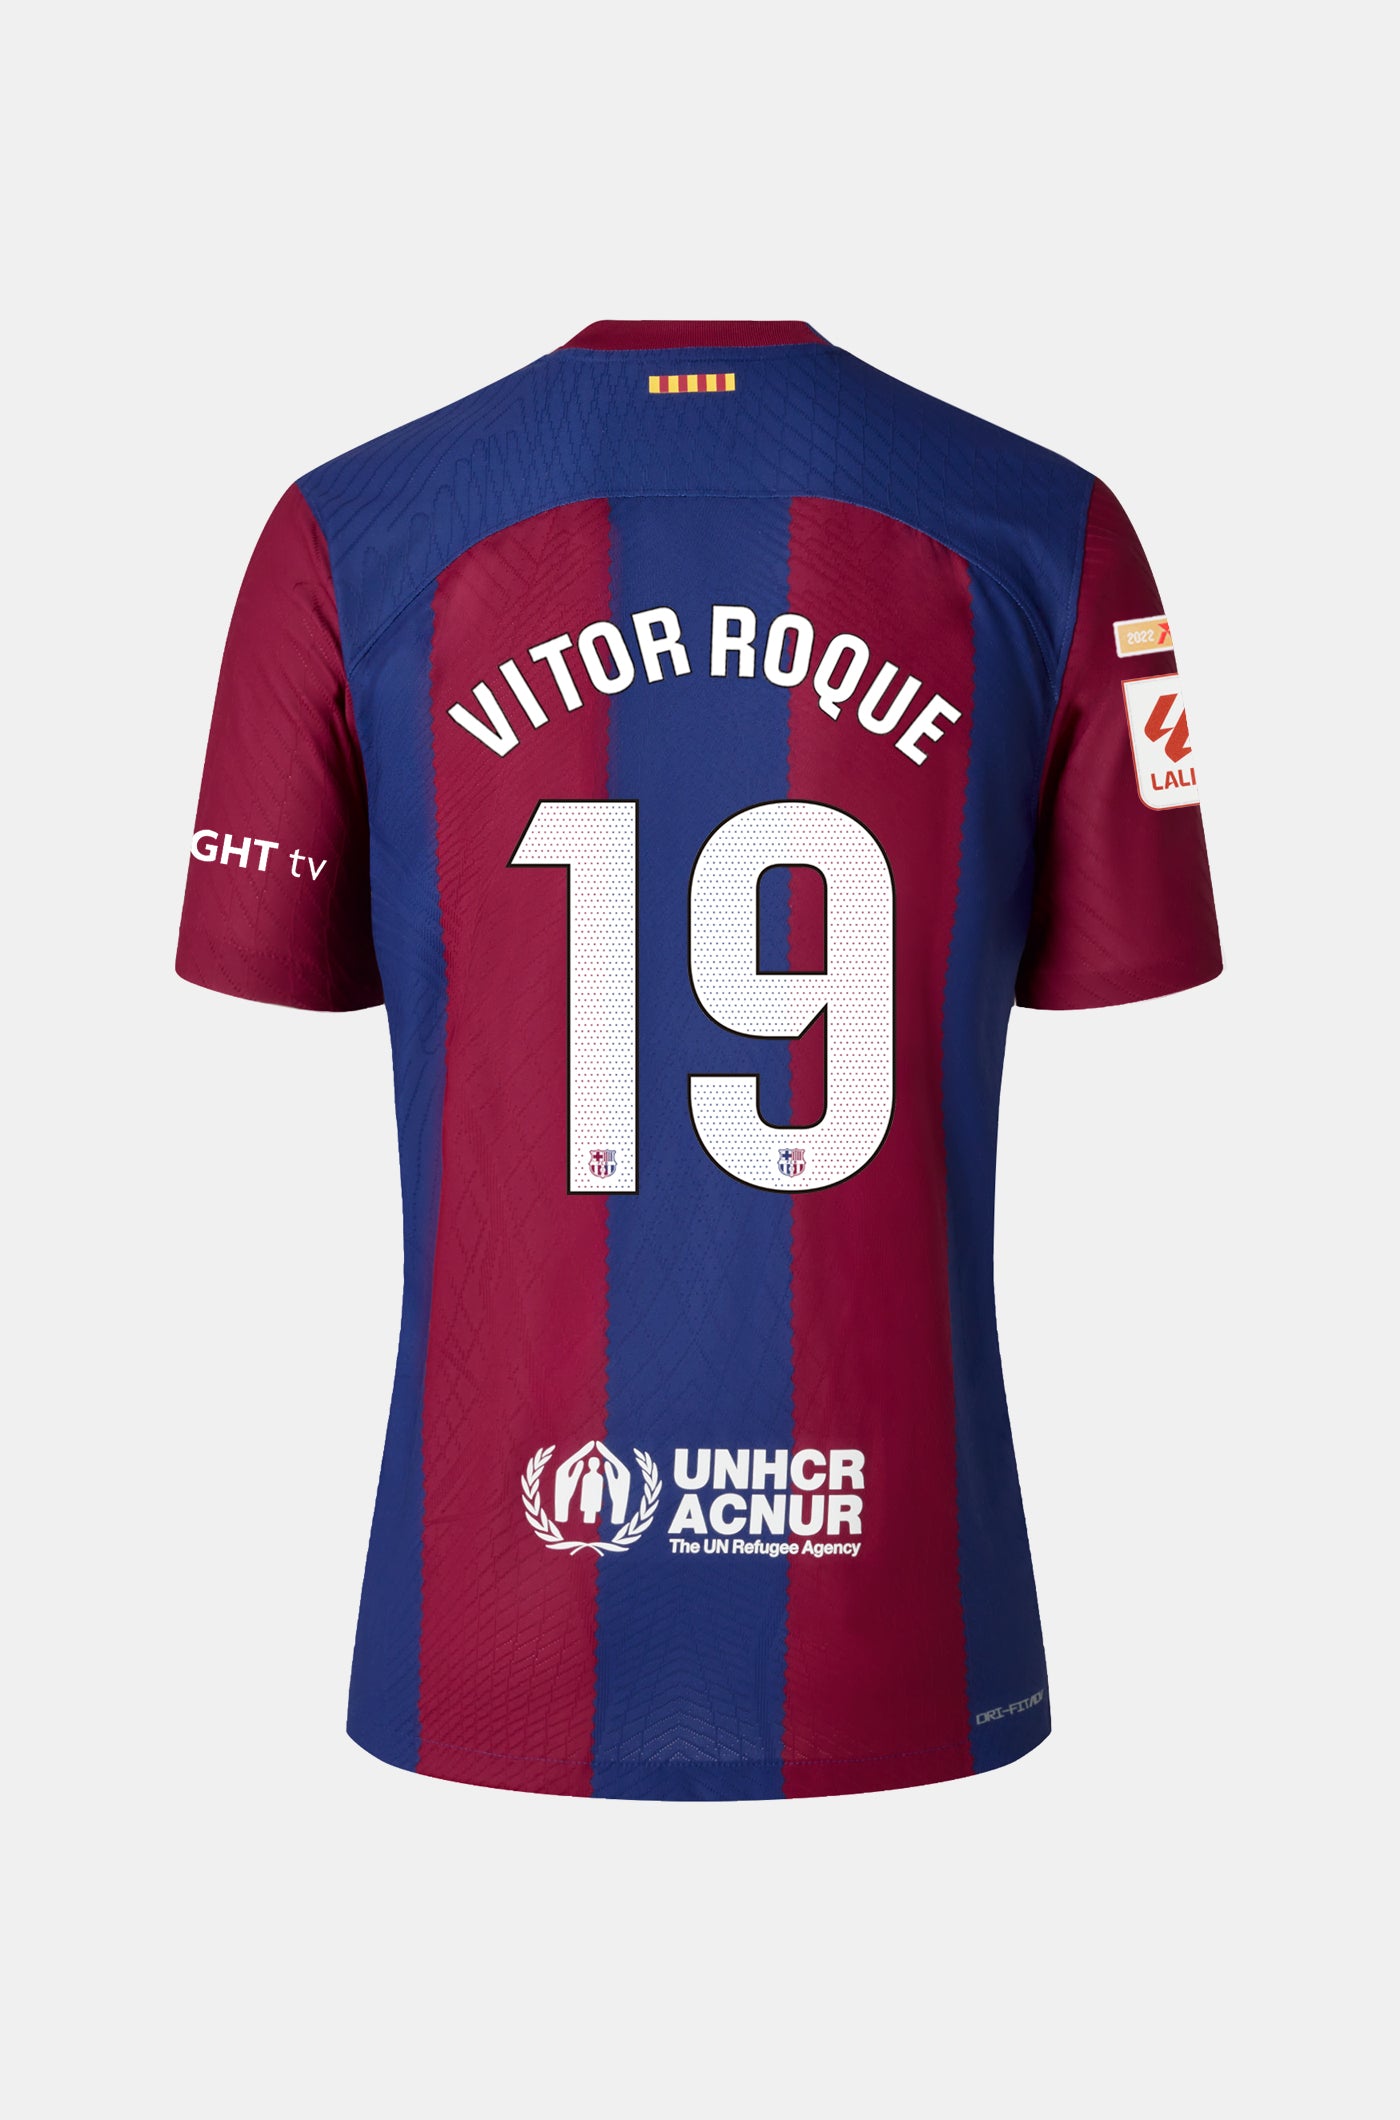 Limited Edition Karol G FC Barcelona men's home shirt 23/24 Player's Edition - VITOR ROQUE